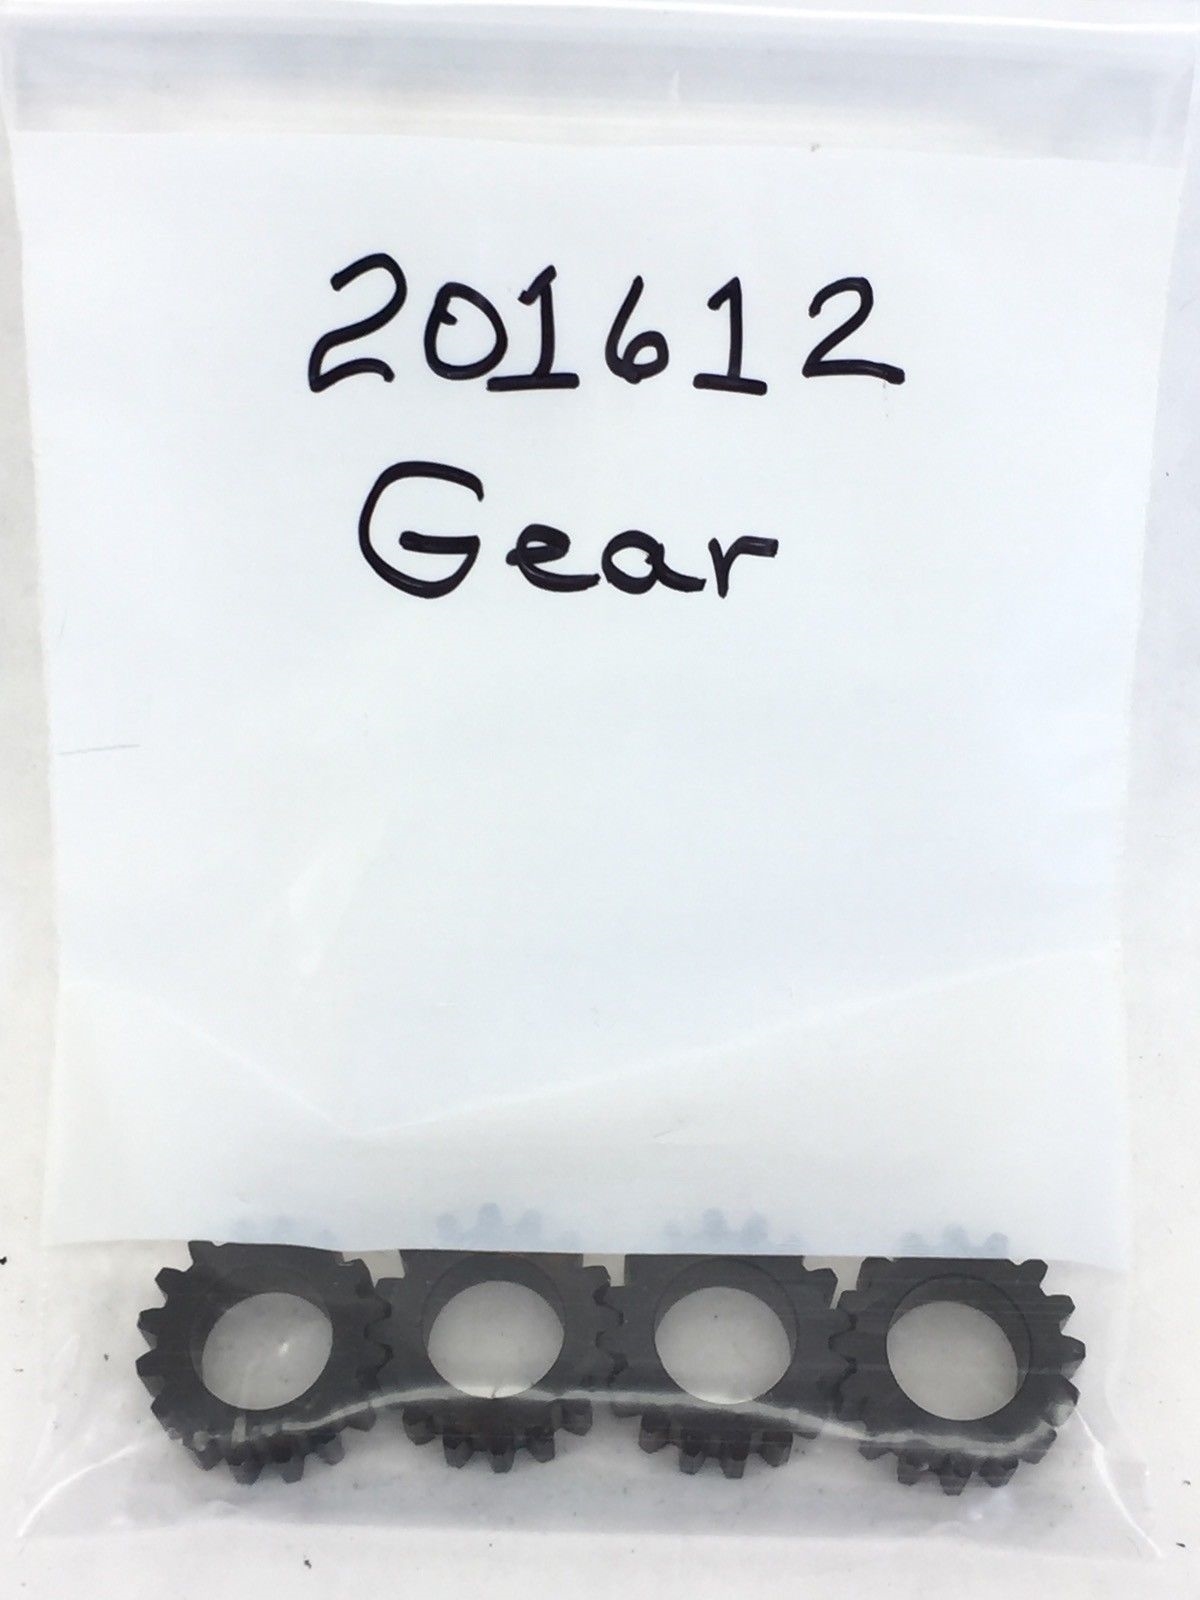 NEW! IR ARO 201612 GEARS PACK of 4 (A576) 1